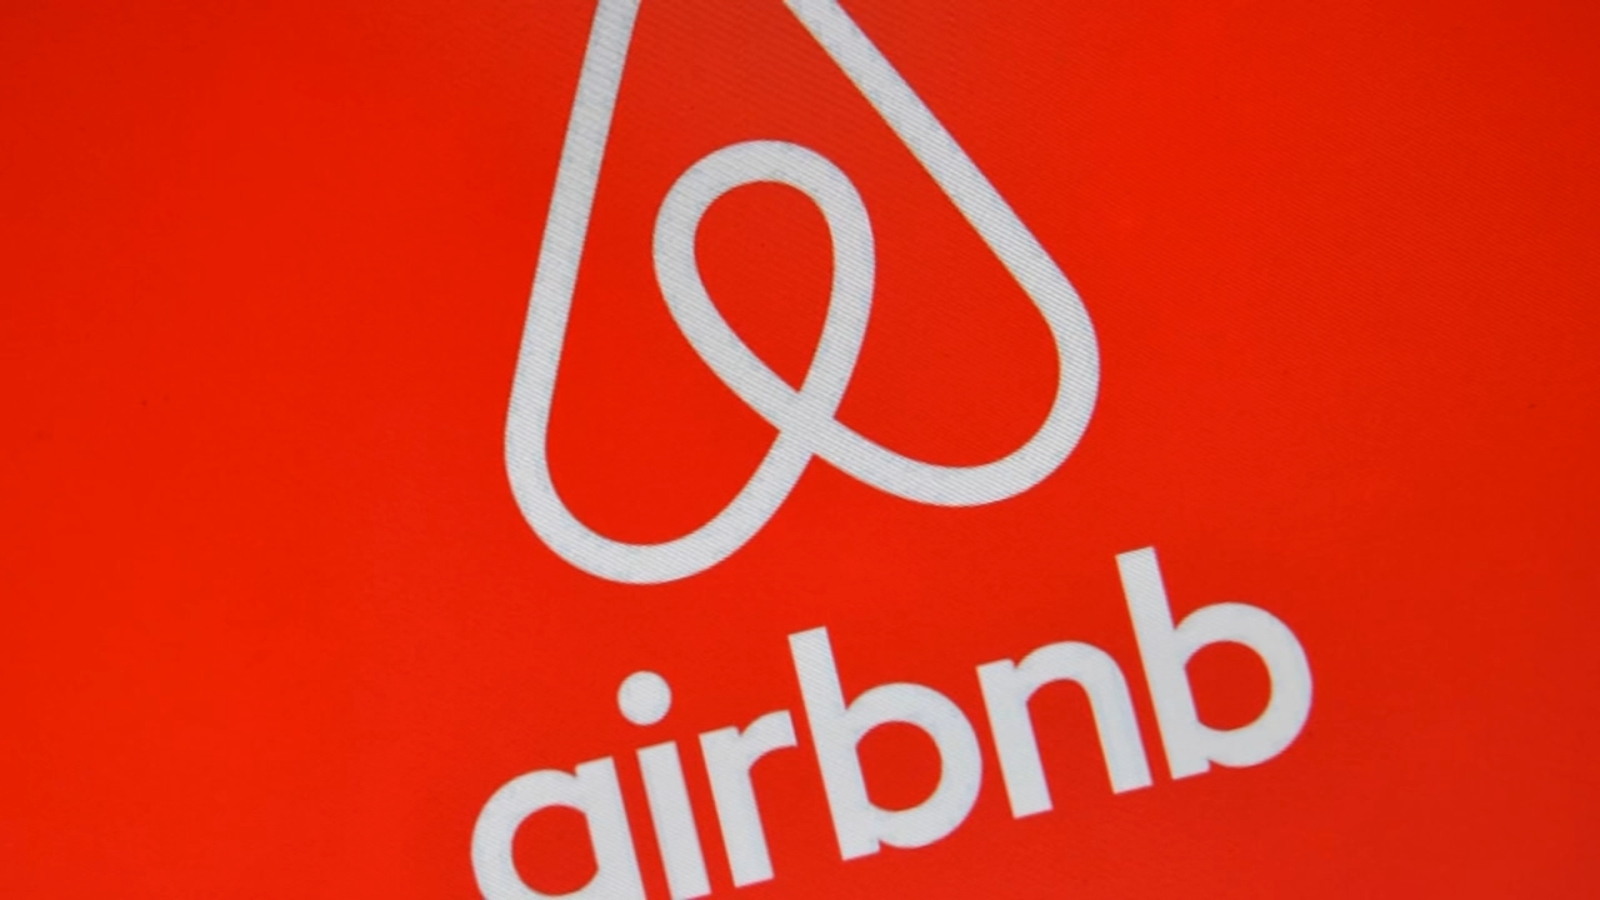 Airbnb updates cancellation policy to cover ‘unforeseen events’ [Video]